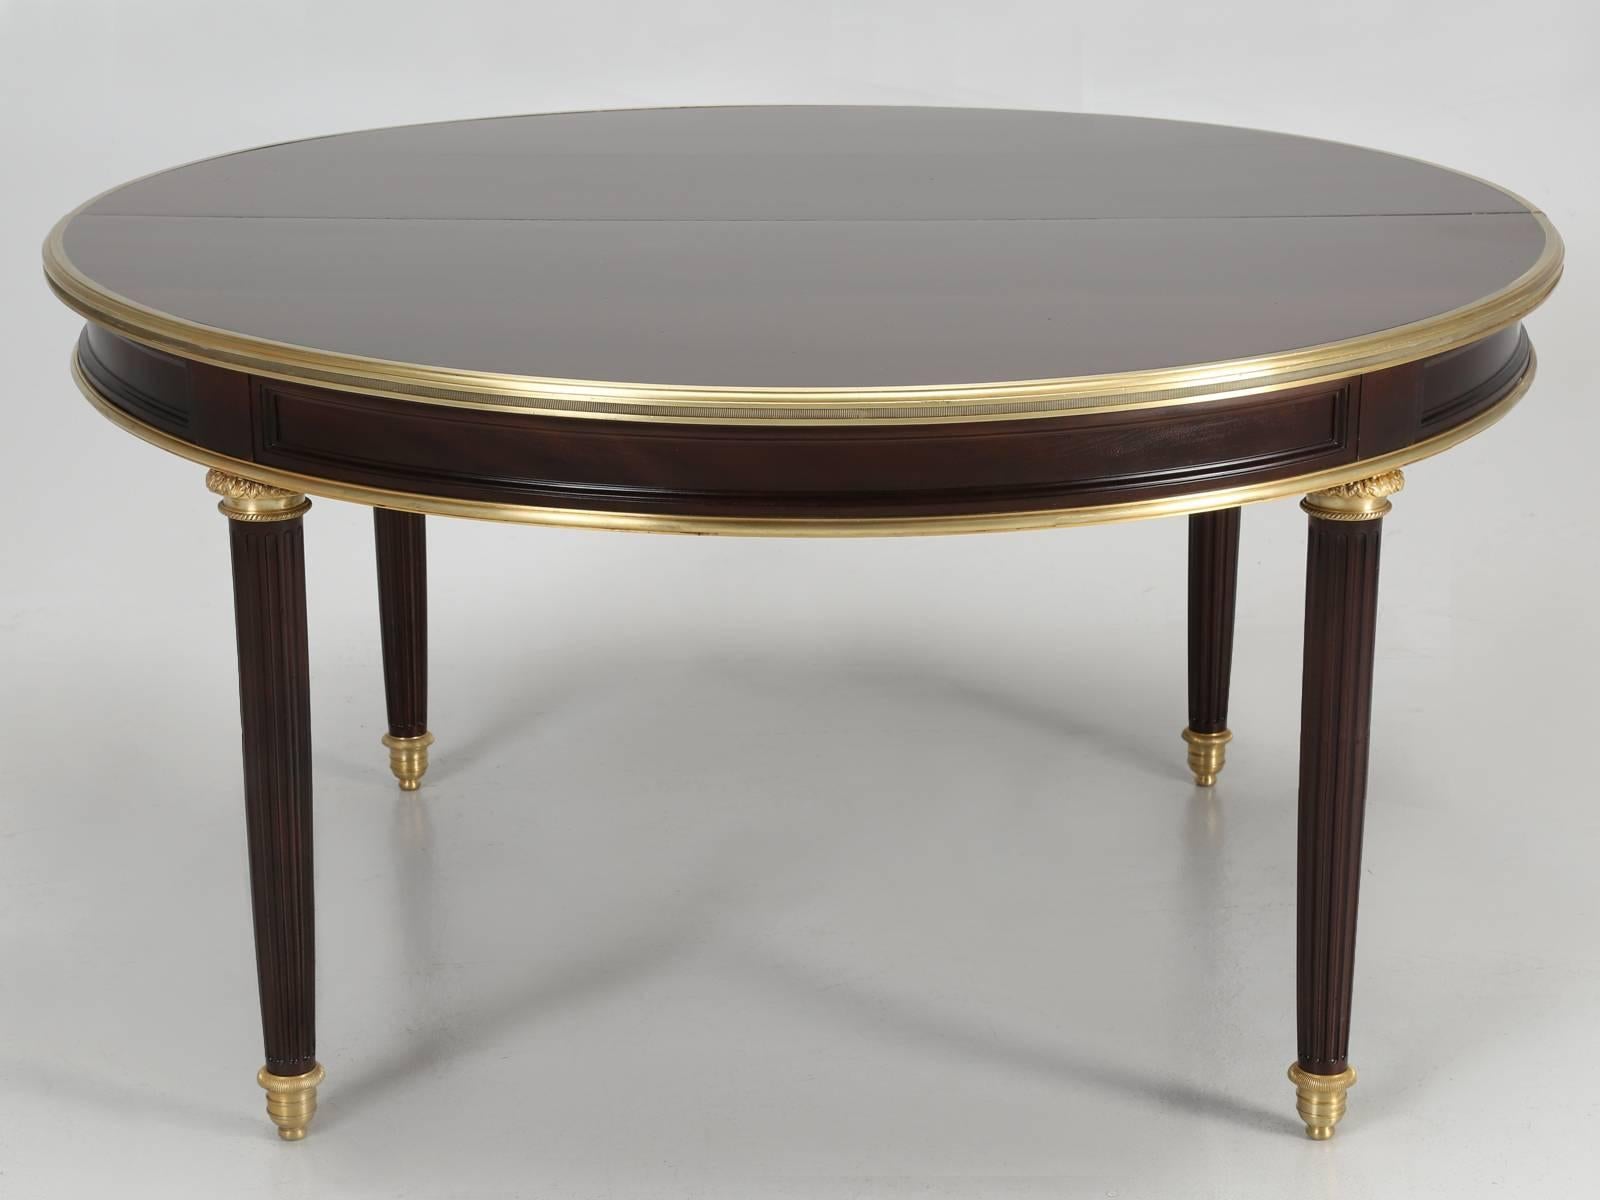 Antique French Louis XVI style oval, or round dining table, complete with (3) matching mahogany leaves. This is not your typical Louis XVI style mahogany dining table, but rather one that was built, to a very high standard. The exquisite highly